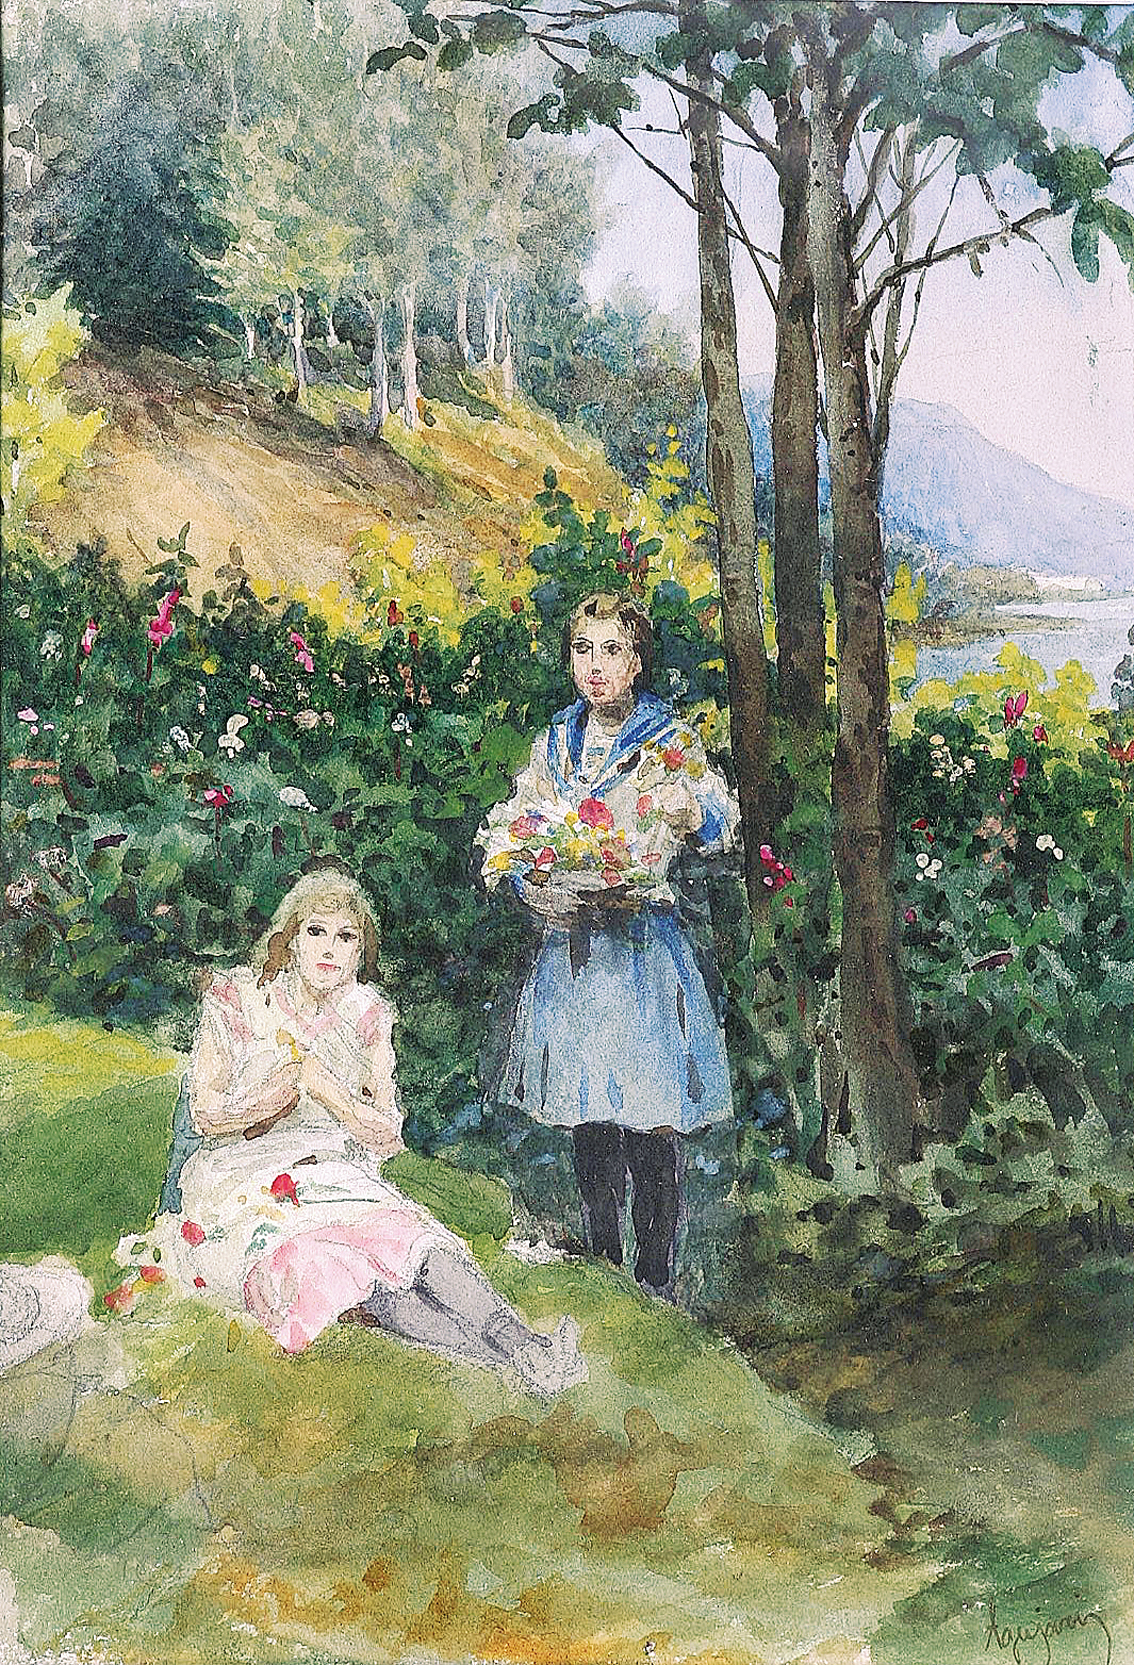 Two girls with flowers in a wooded landscape near a lake